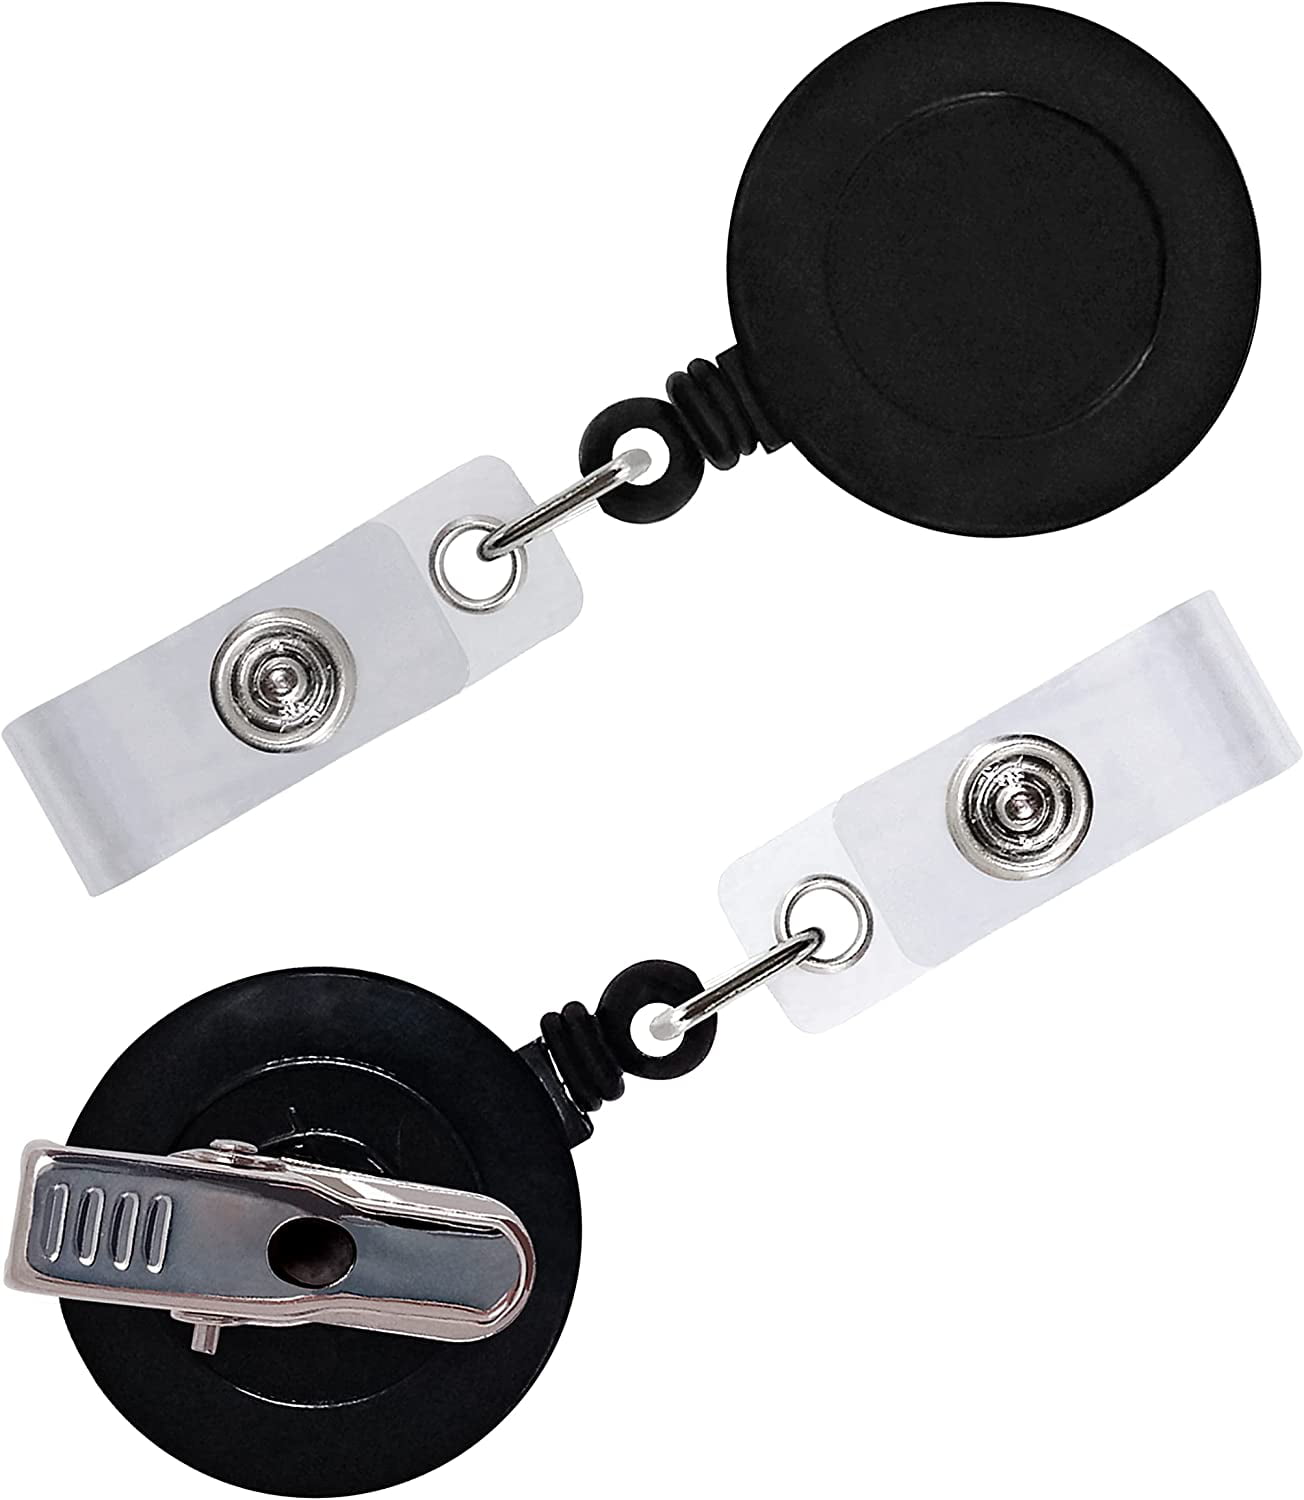 25 Pack Retractable ID Badge Holder Reels with Swivel Alligator